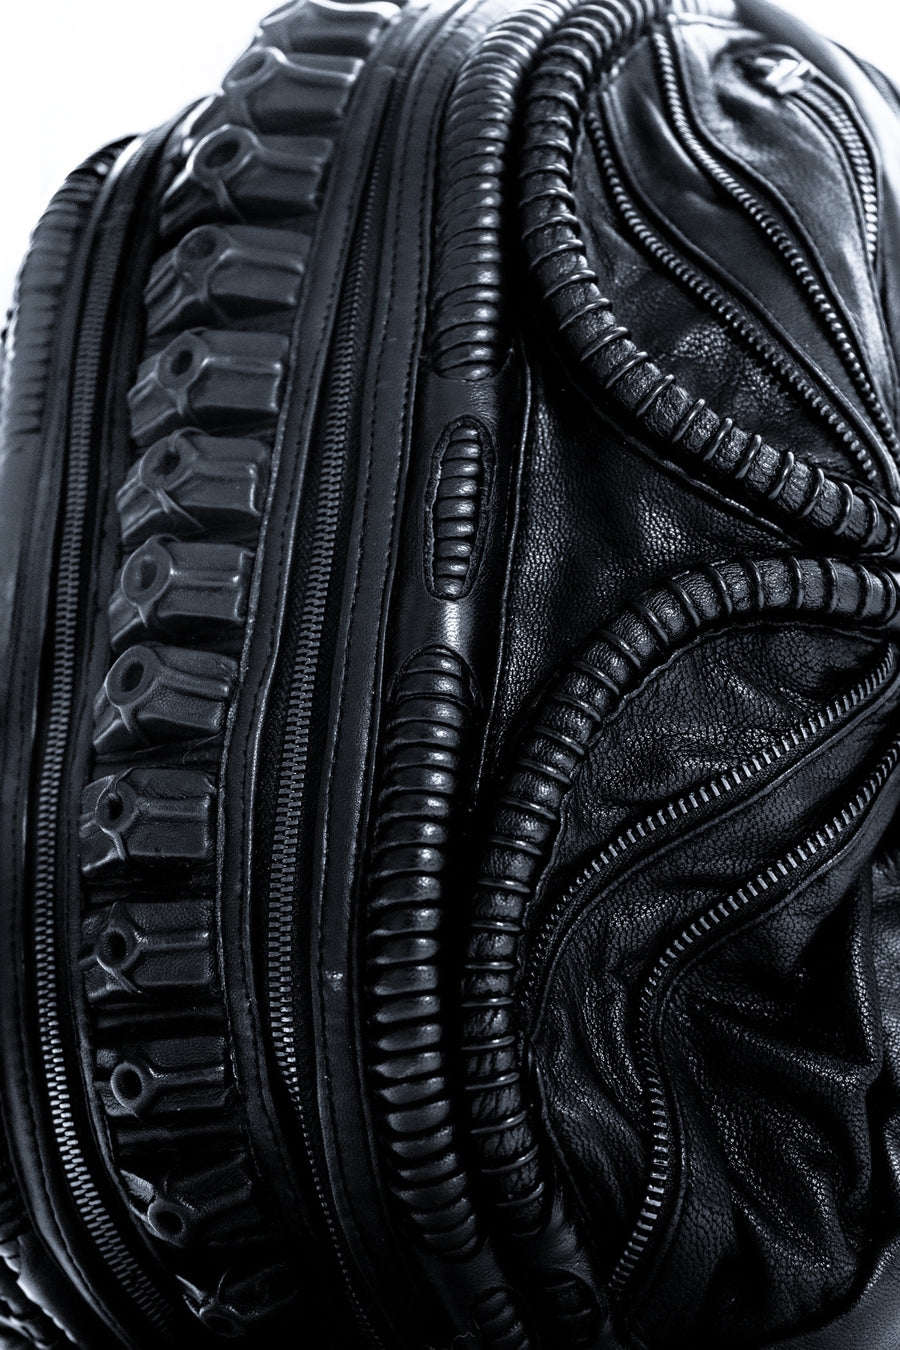 Avant-garde biomorphic backpack in dark post-apocalyptic fashion and leather handcrafted detail